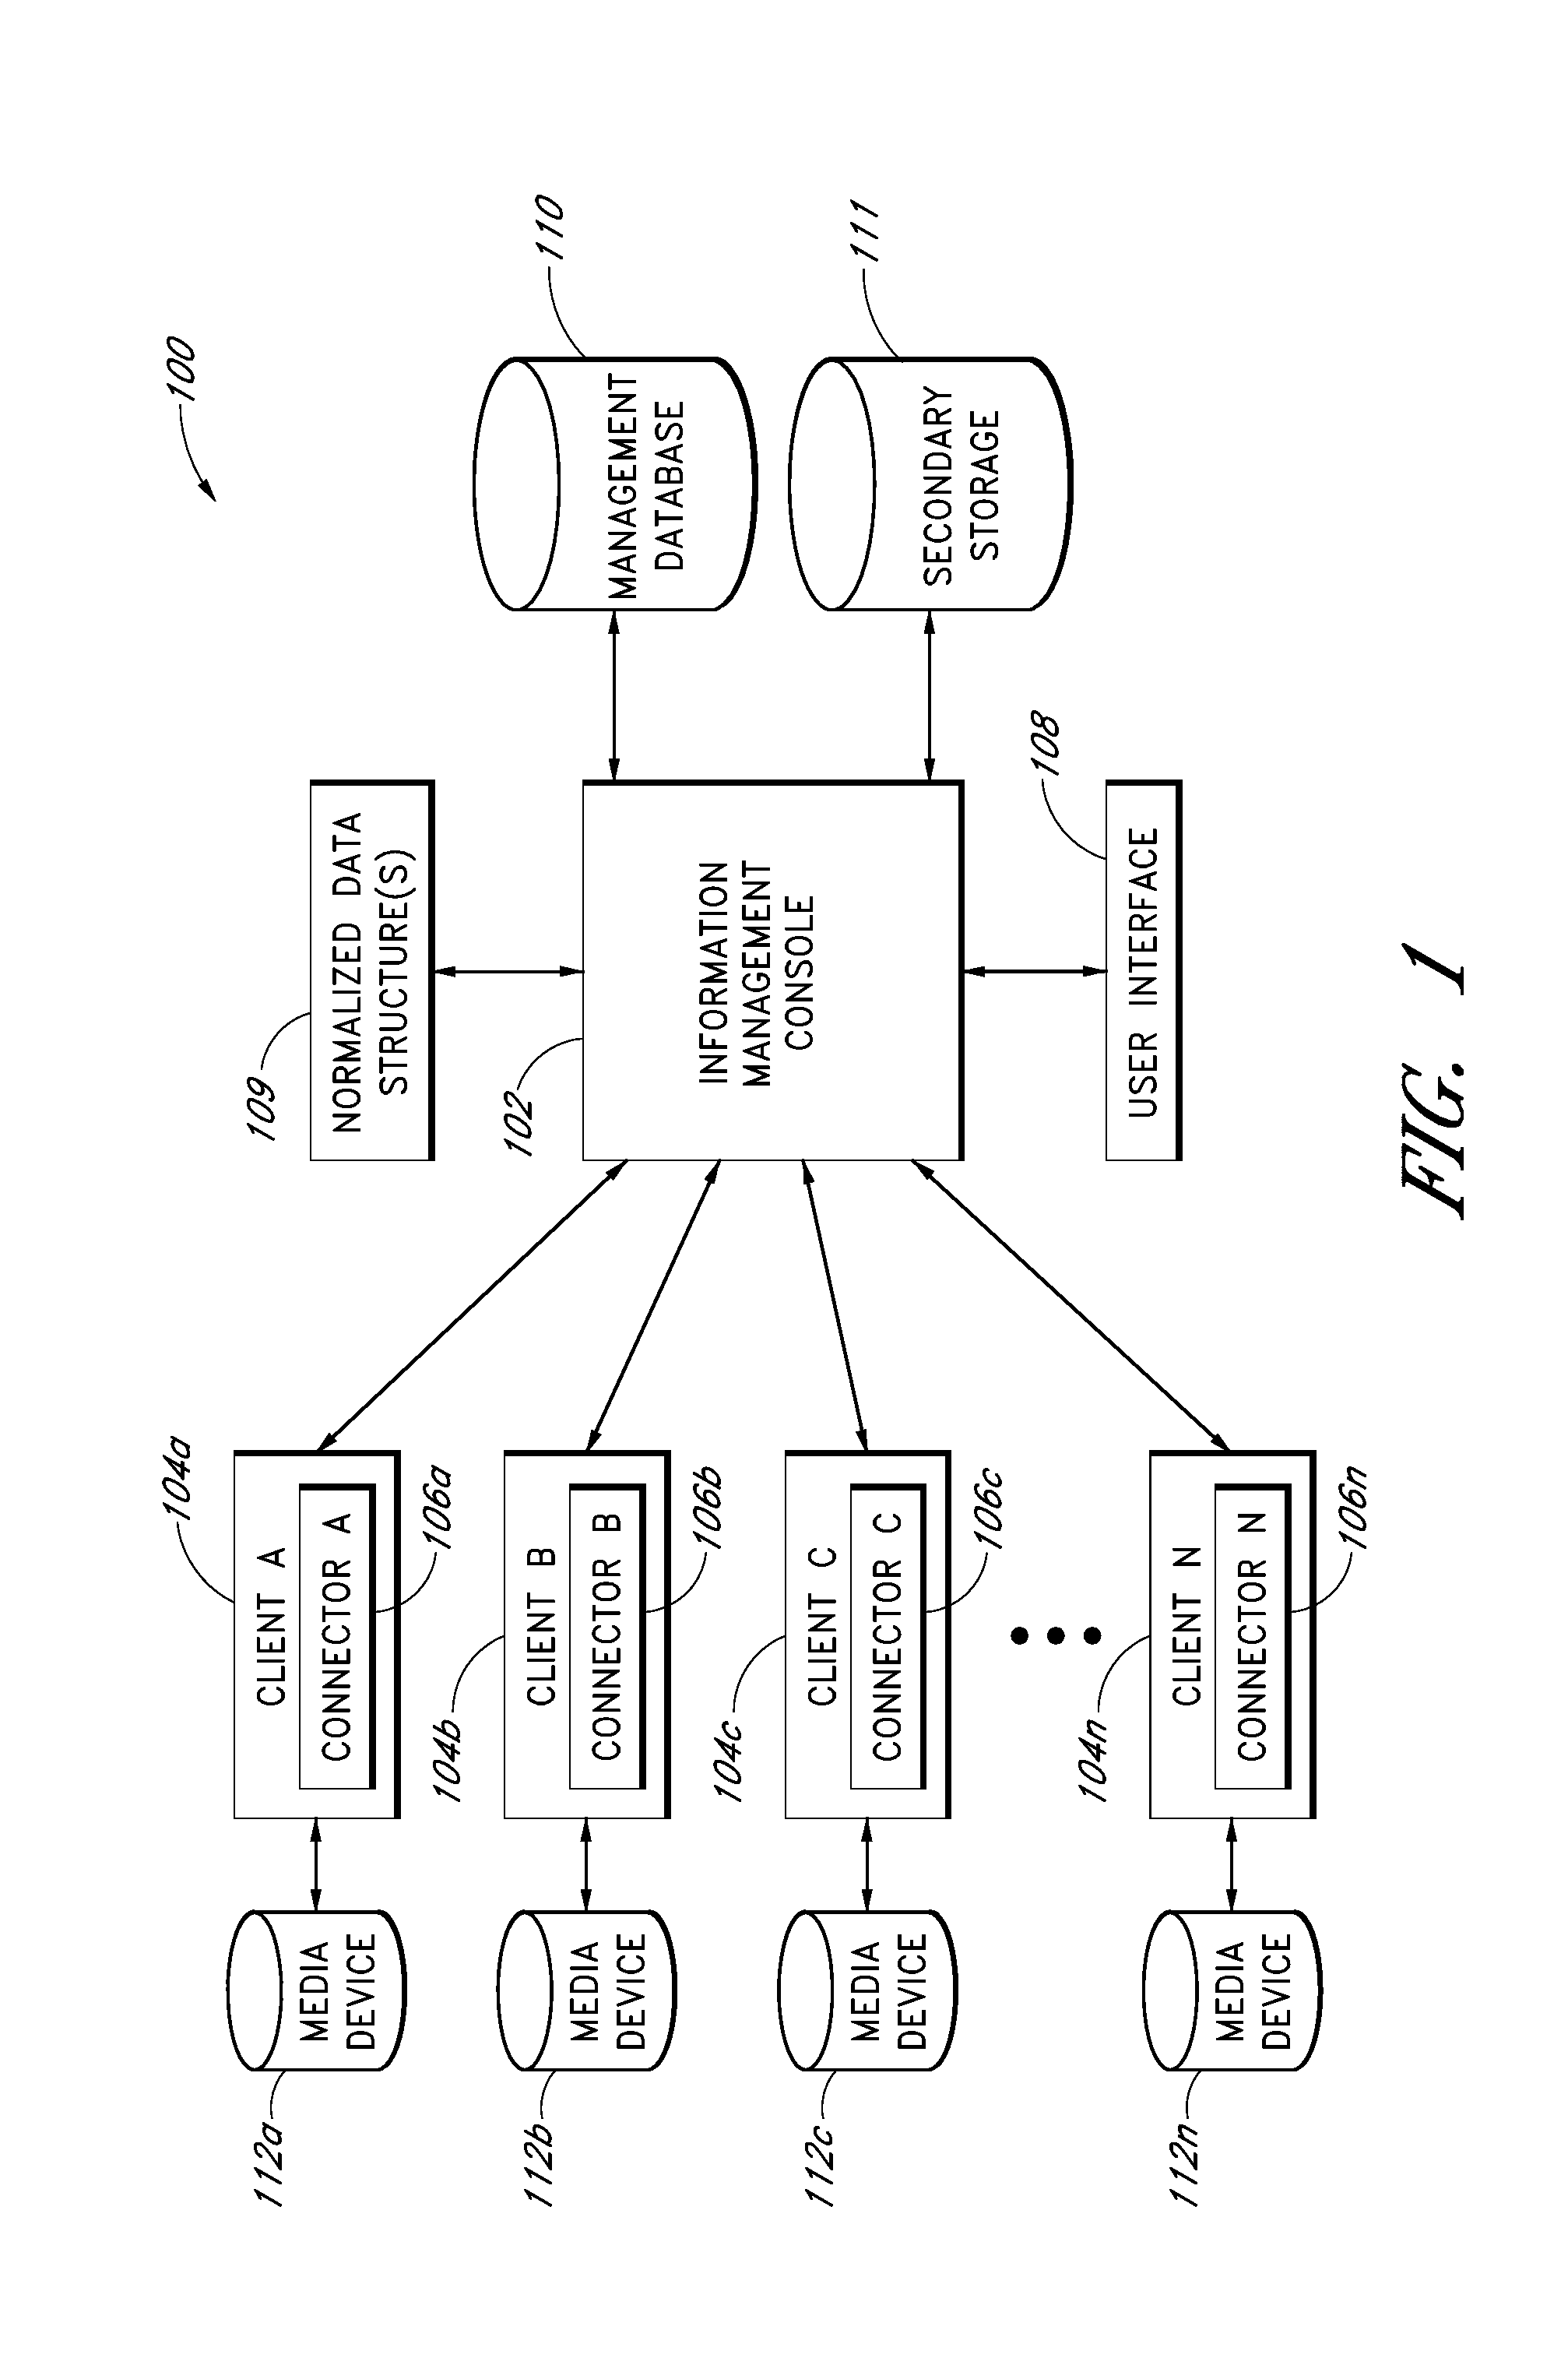 Information management systems and methods for heterogeneous data sources